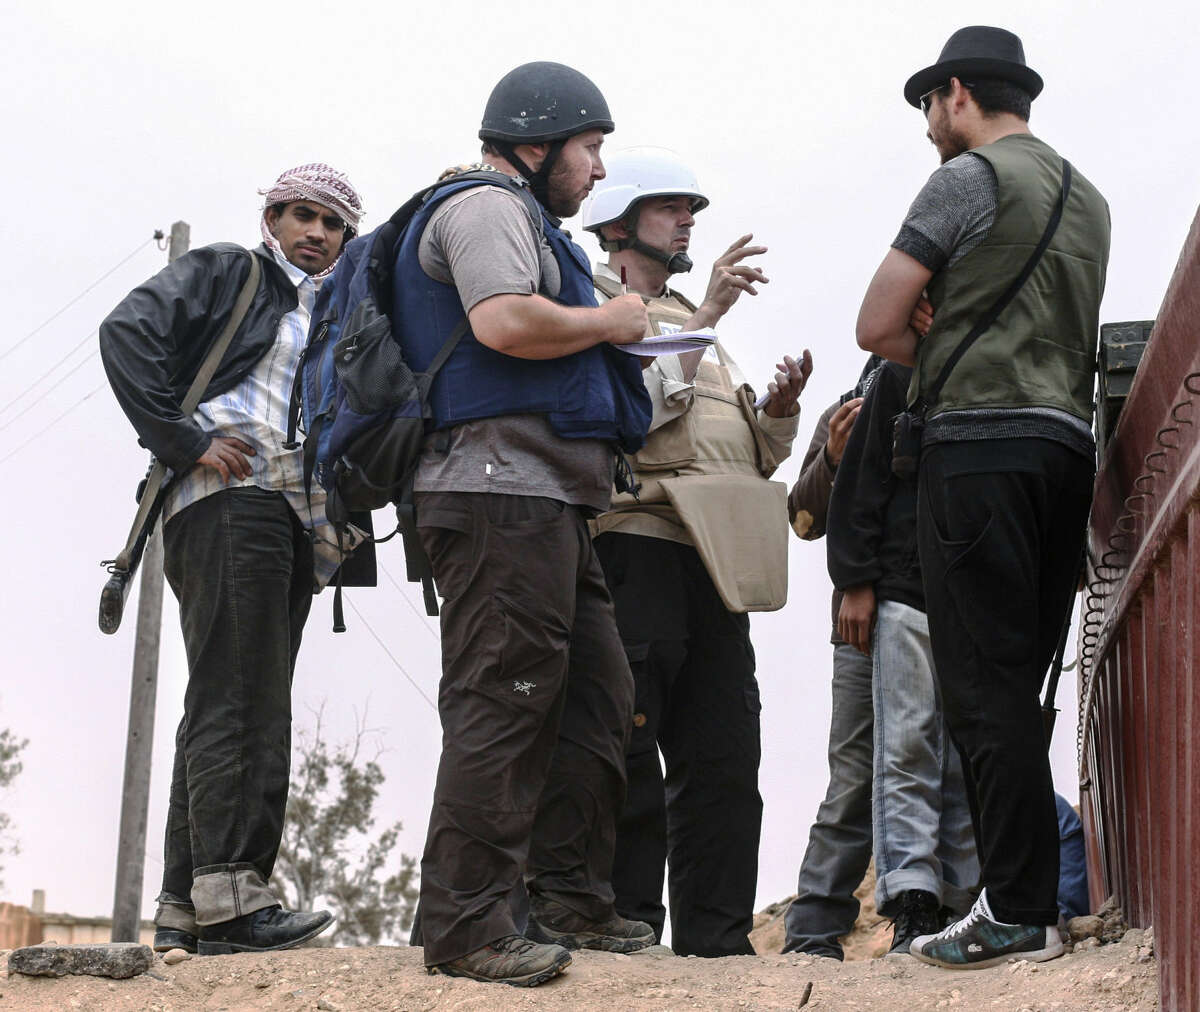 MISRATA, LIBYA - JUNE 02: In this handout image made available by the photographer American journalist Steven Sotloff (Center with black helmet) talks to Libyan rebels on the Al Dafniya front line, 25 km west of Misrata on June 02, 2011 in Misrata, Libya.